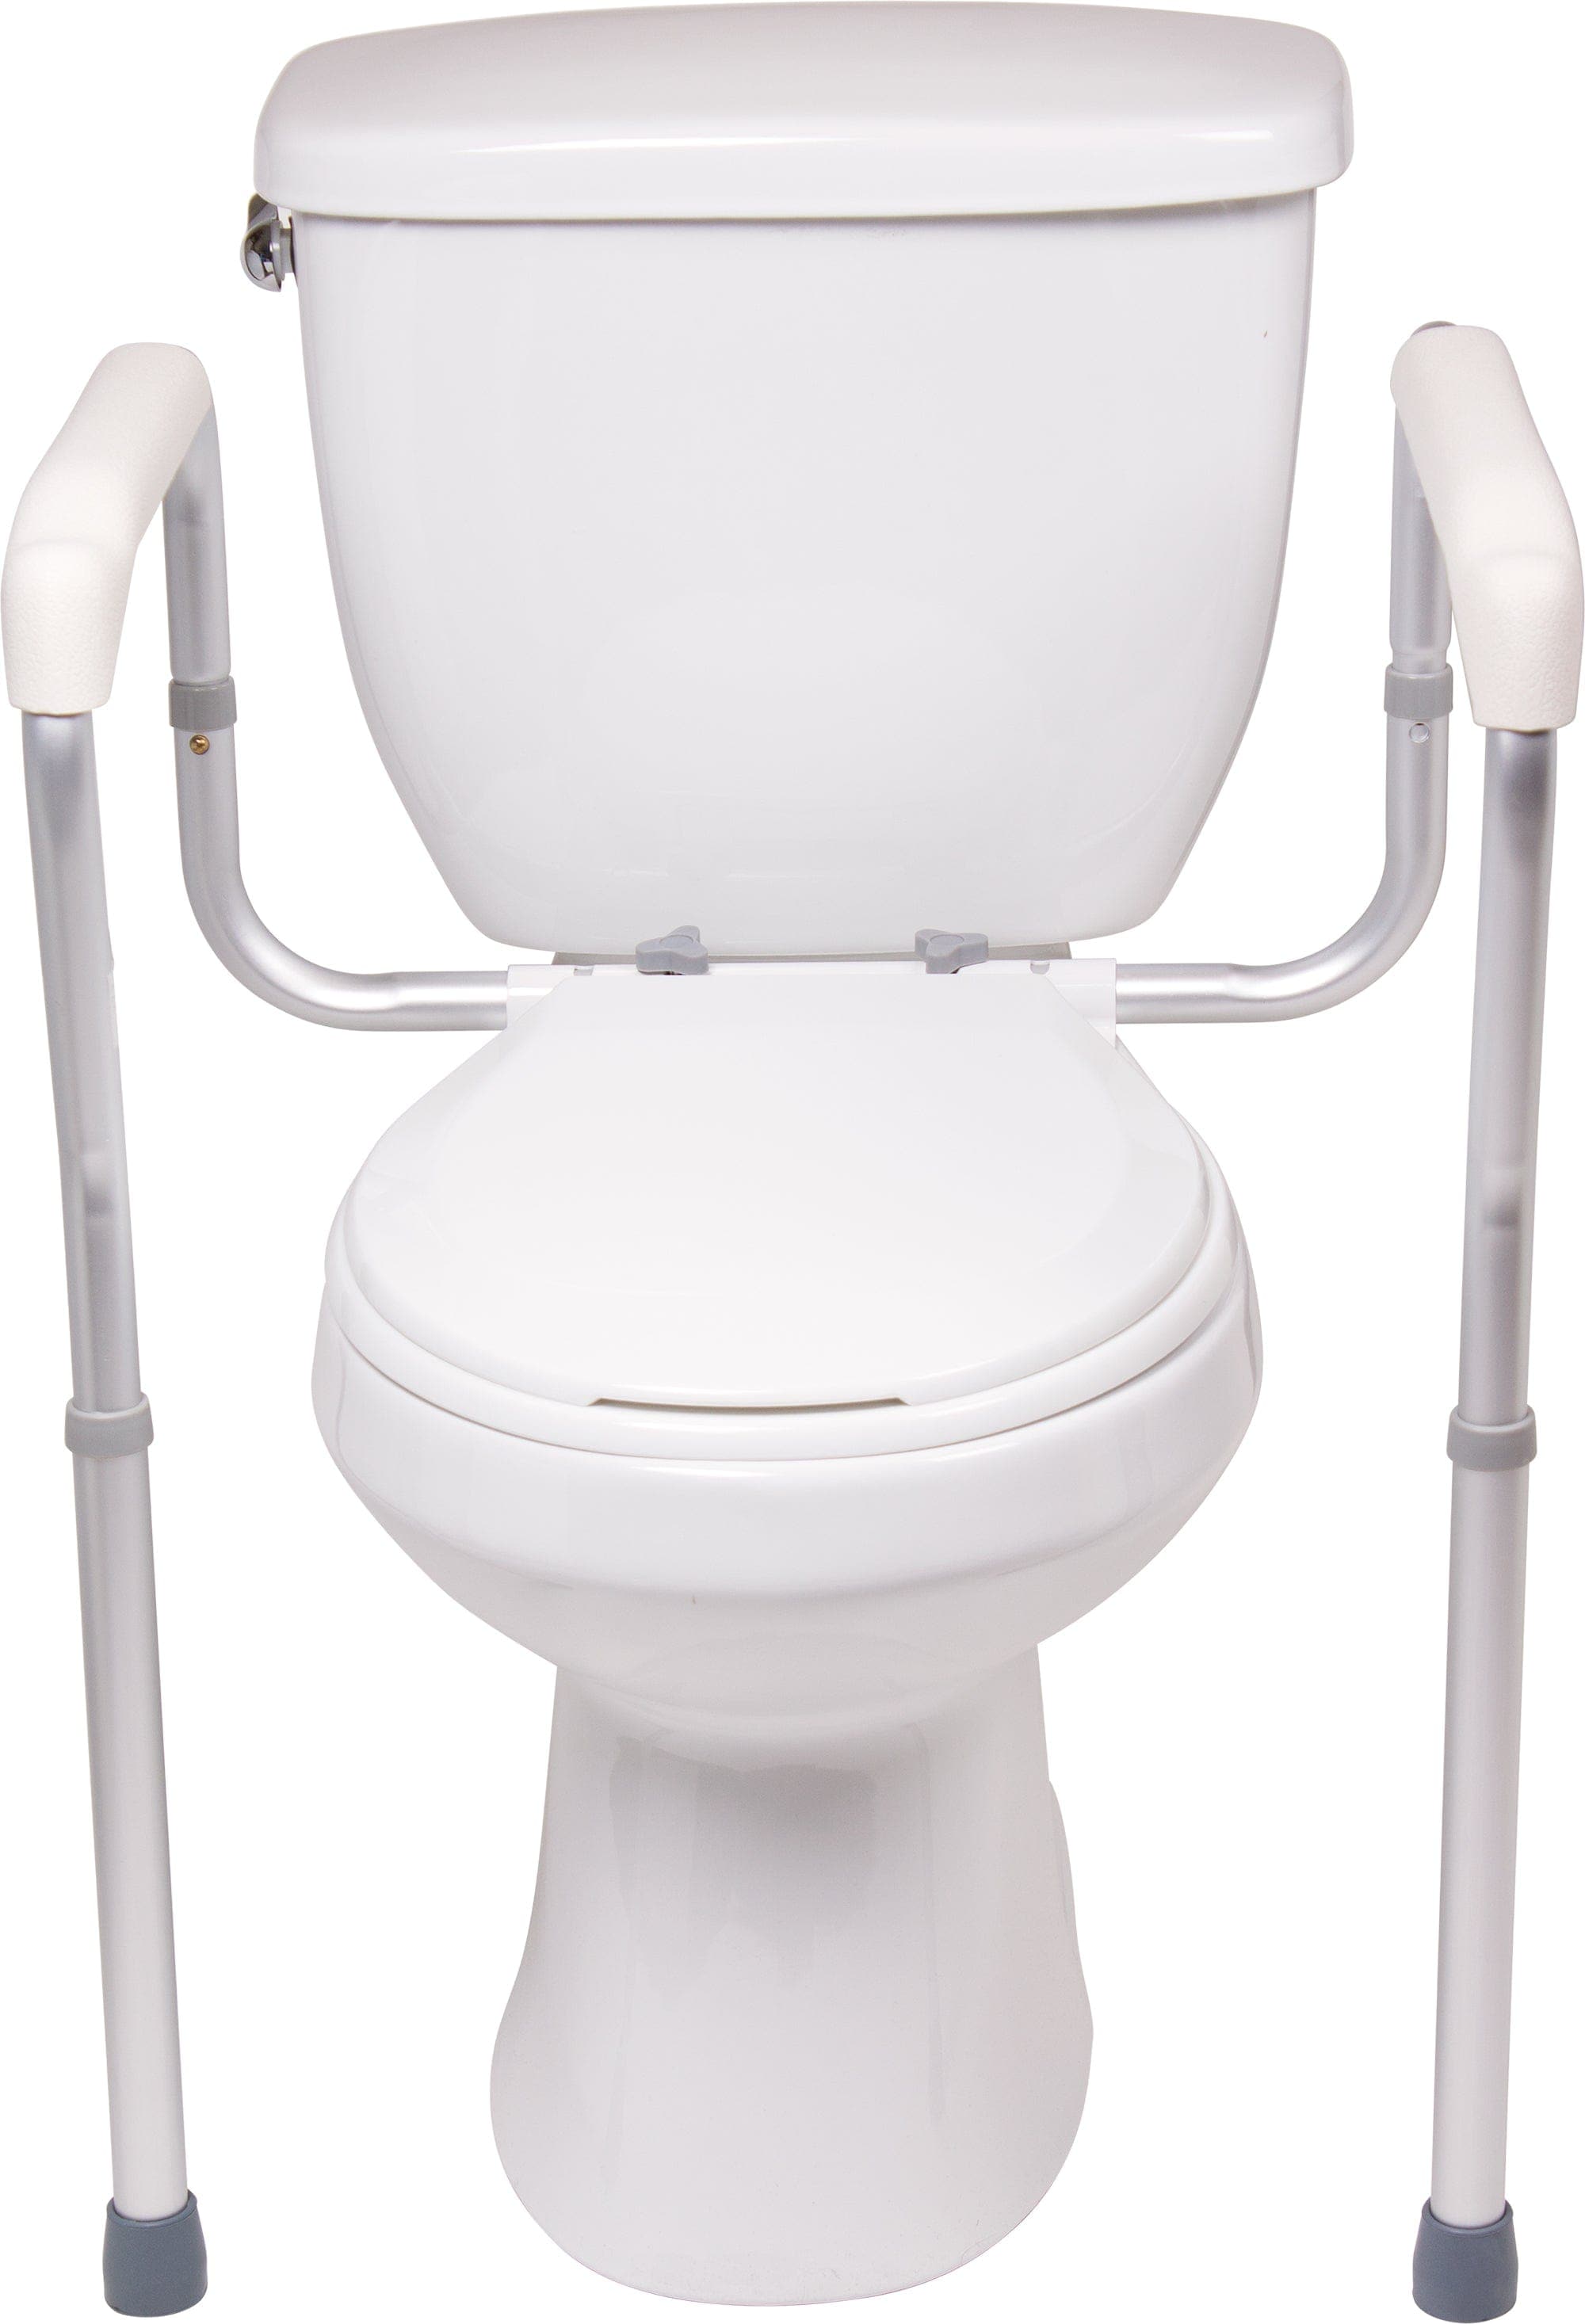 Compass Health Safety Frames Compass Health ProBasics Toilet Safety Frame